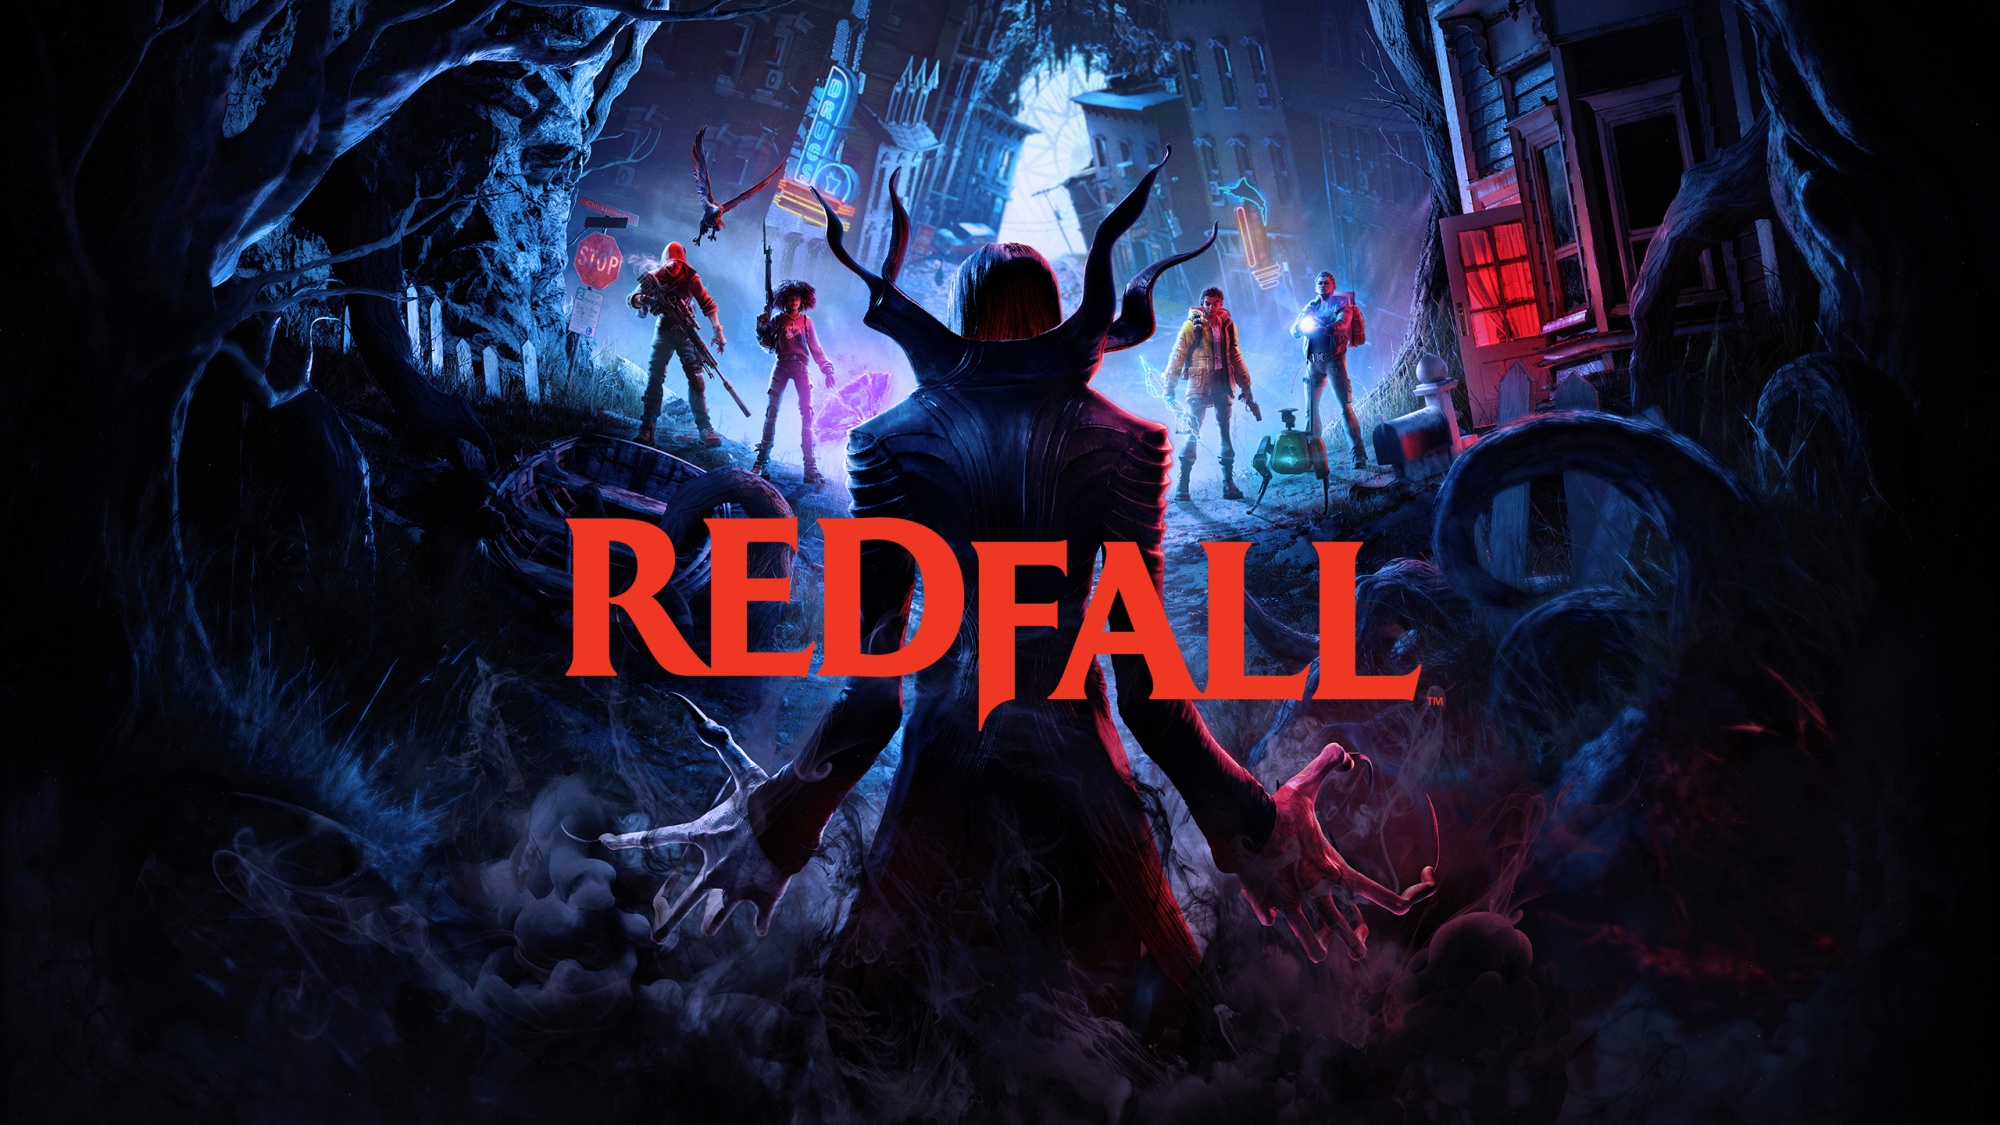 Redfall's latest update went live yesterday with a ton of changes